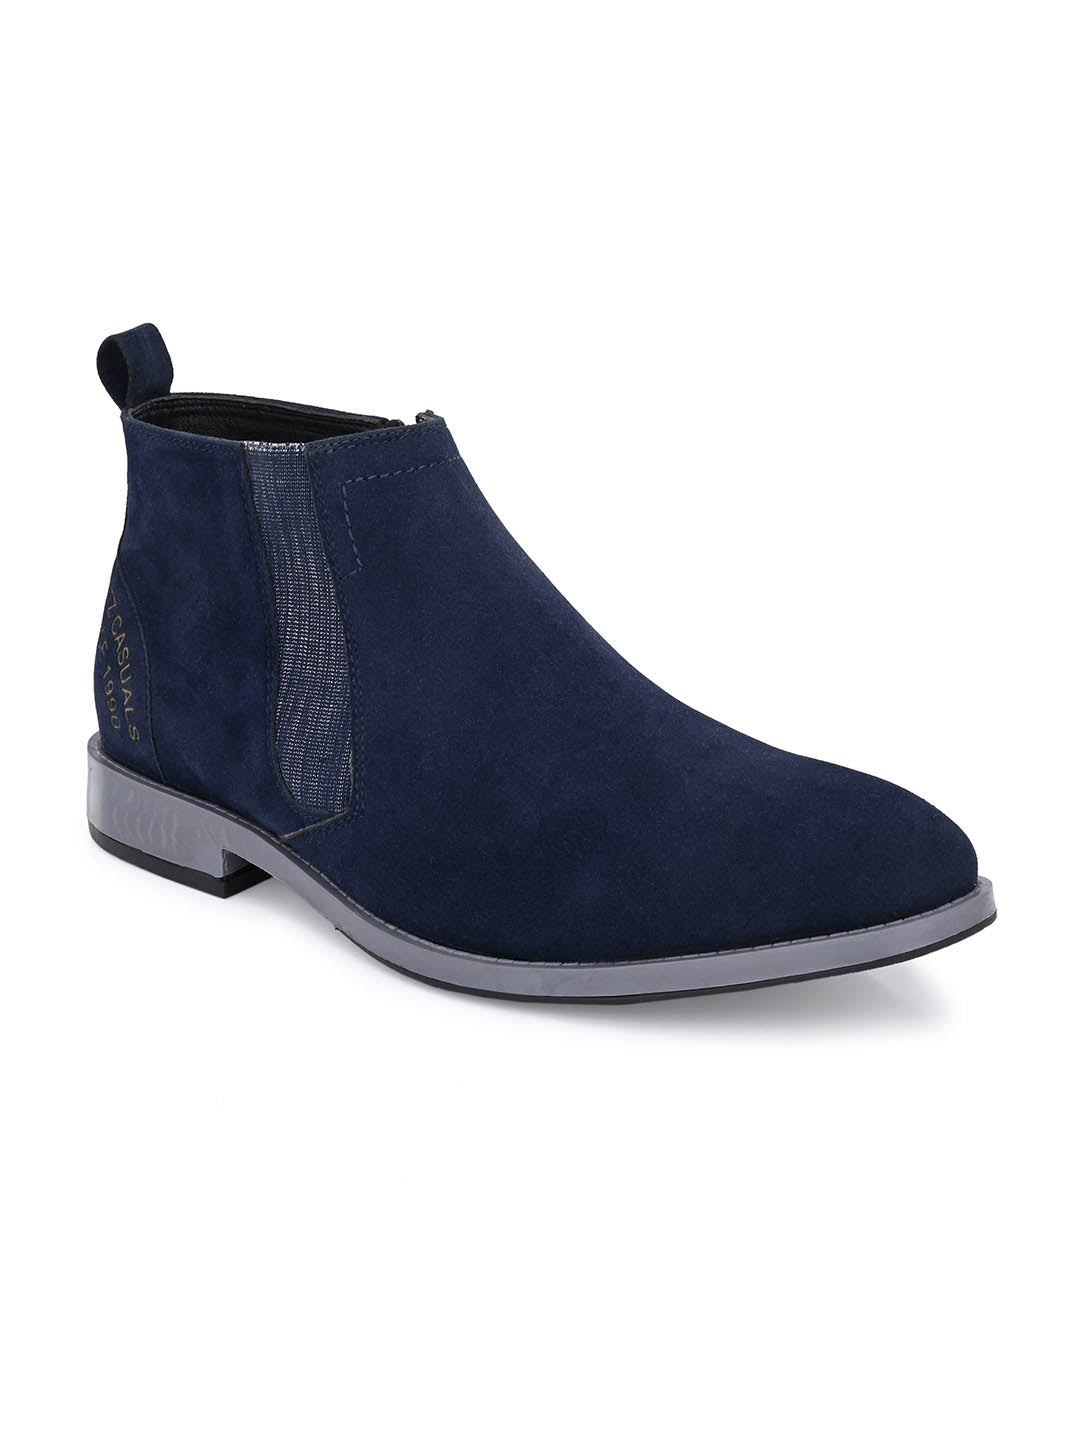 Buy Bruno Manetti Women Navy Blue Solid Suede Heeled Boots - Boots for Women  13174752 | Myntra